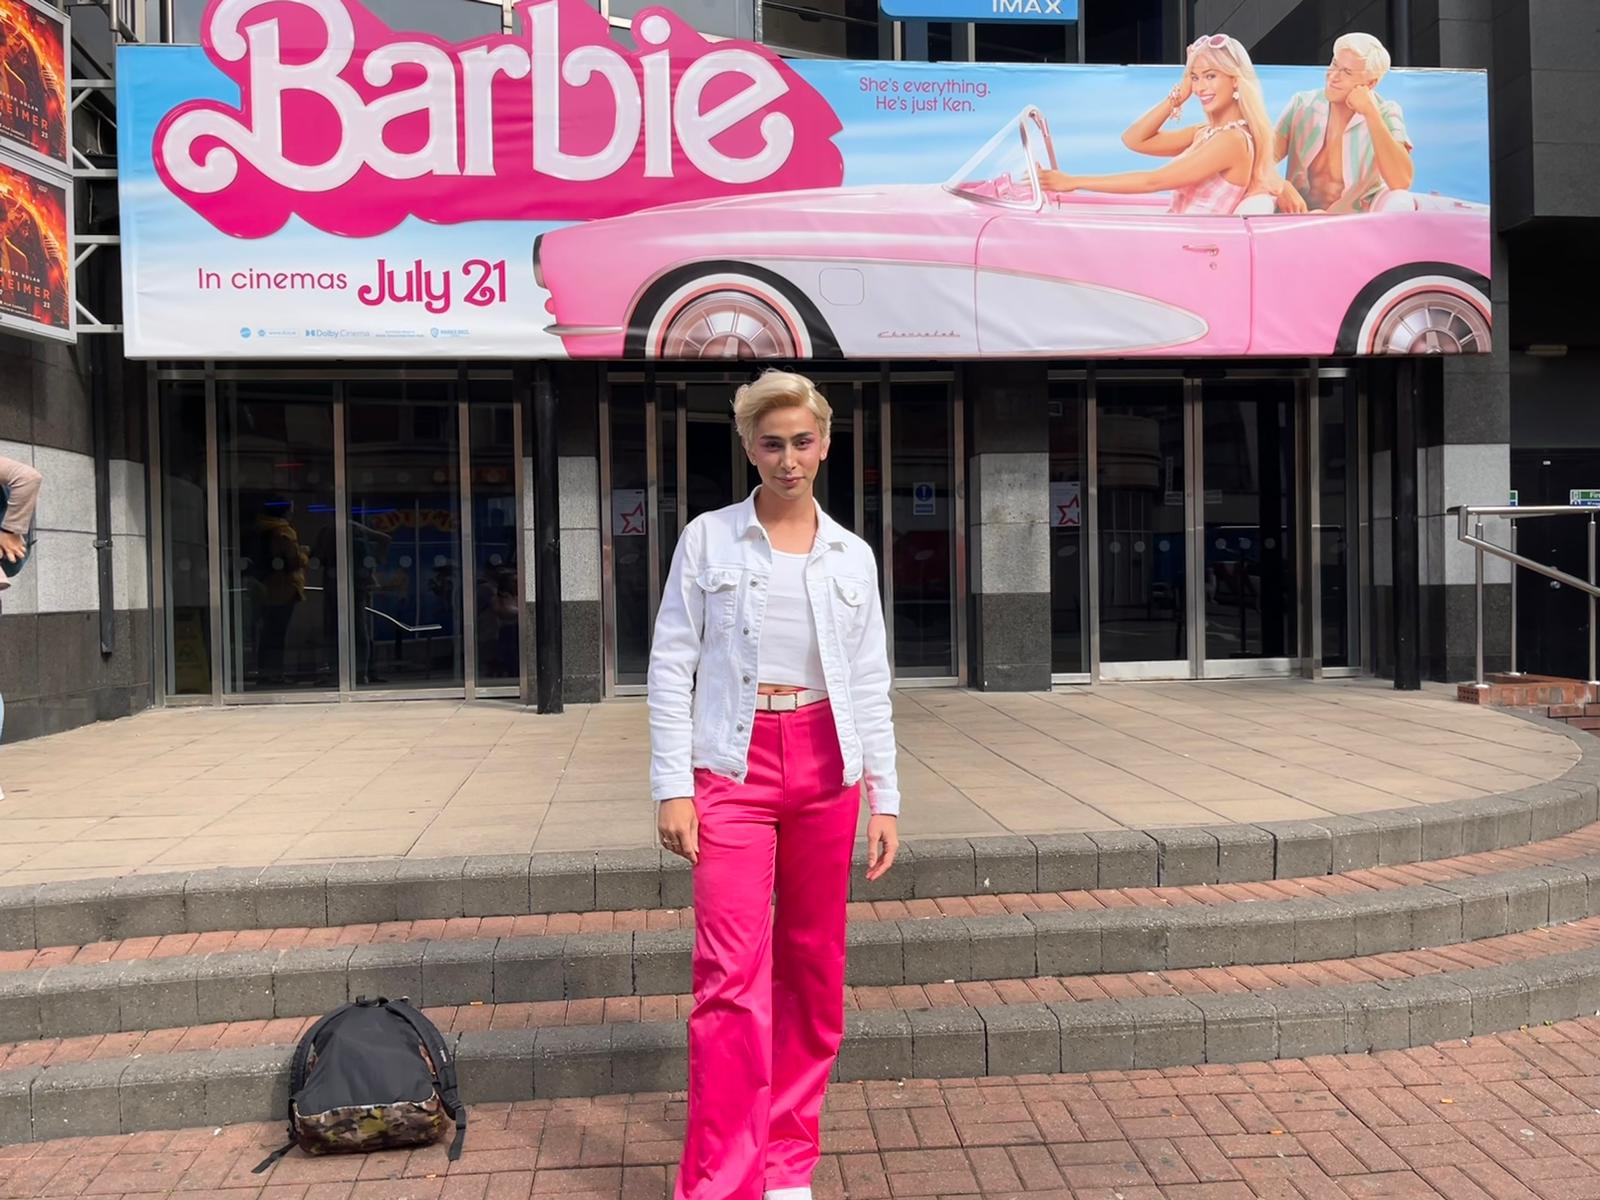 Barbie fan Giovanni at the first screening this morning at Cineworld Parnell Street